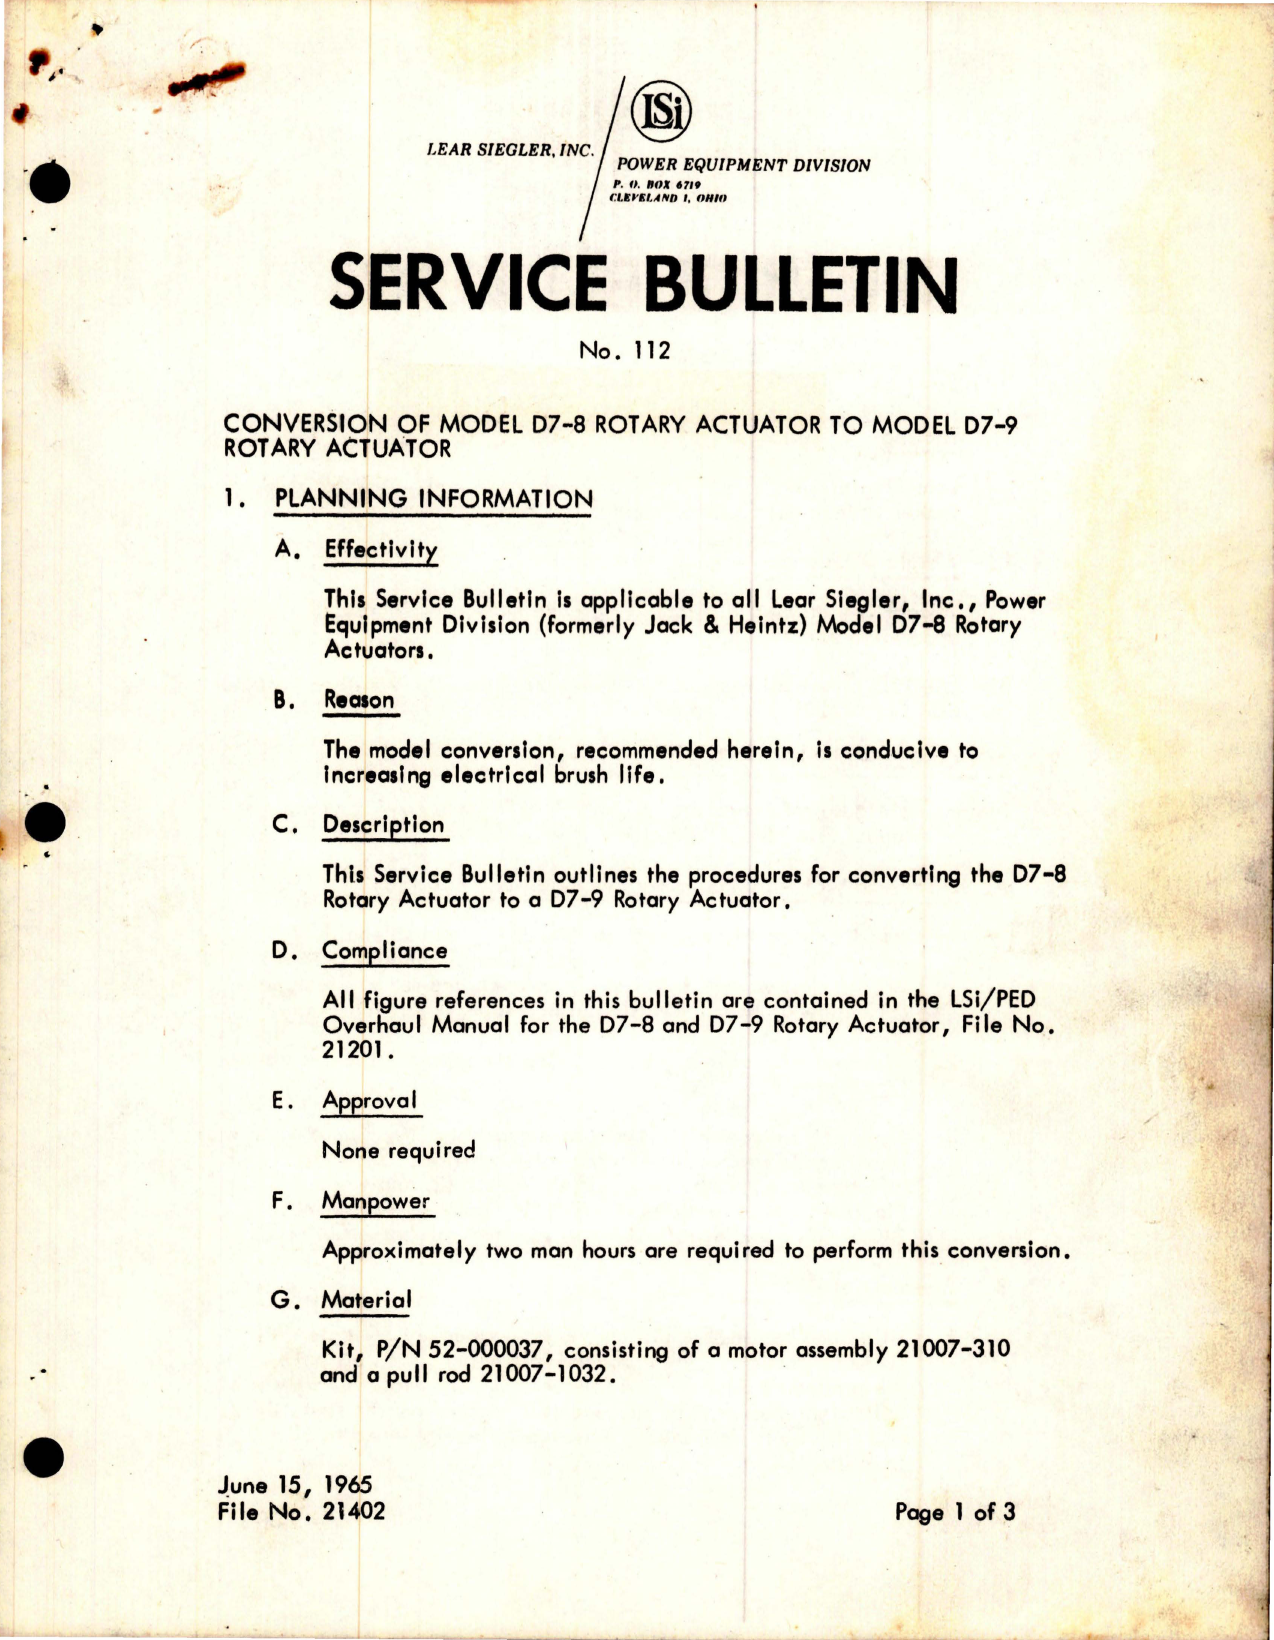 Sample page 1 from AirCorps Library document: Service Bulletin No. 112 - Rotary Actuator - Conversion of Model D7-8 to D7-9